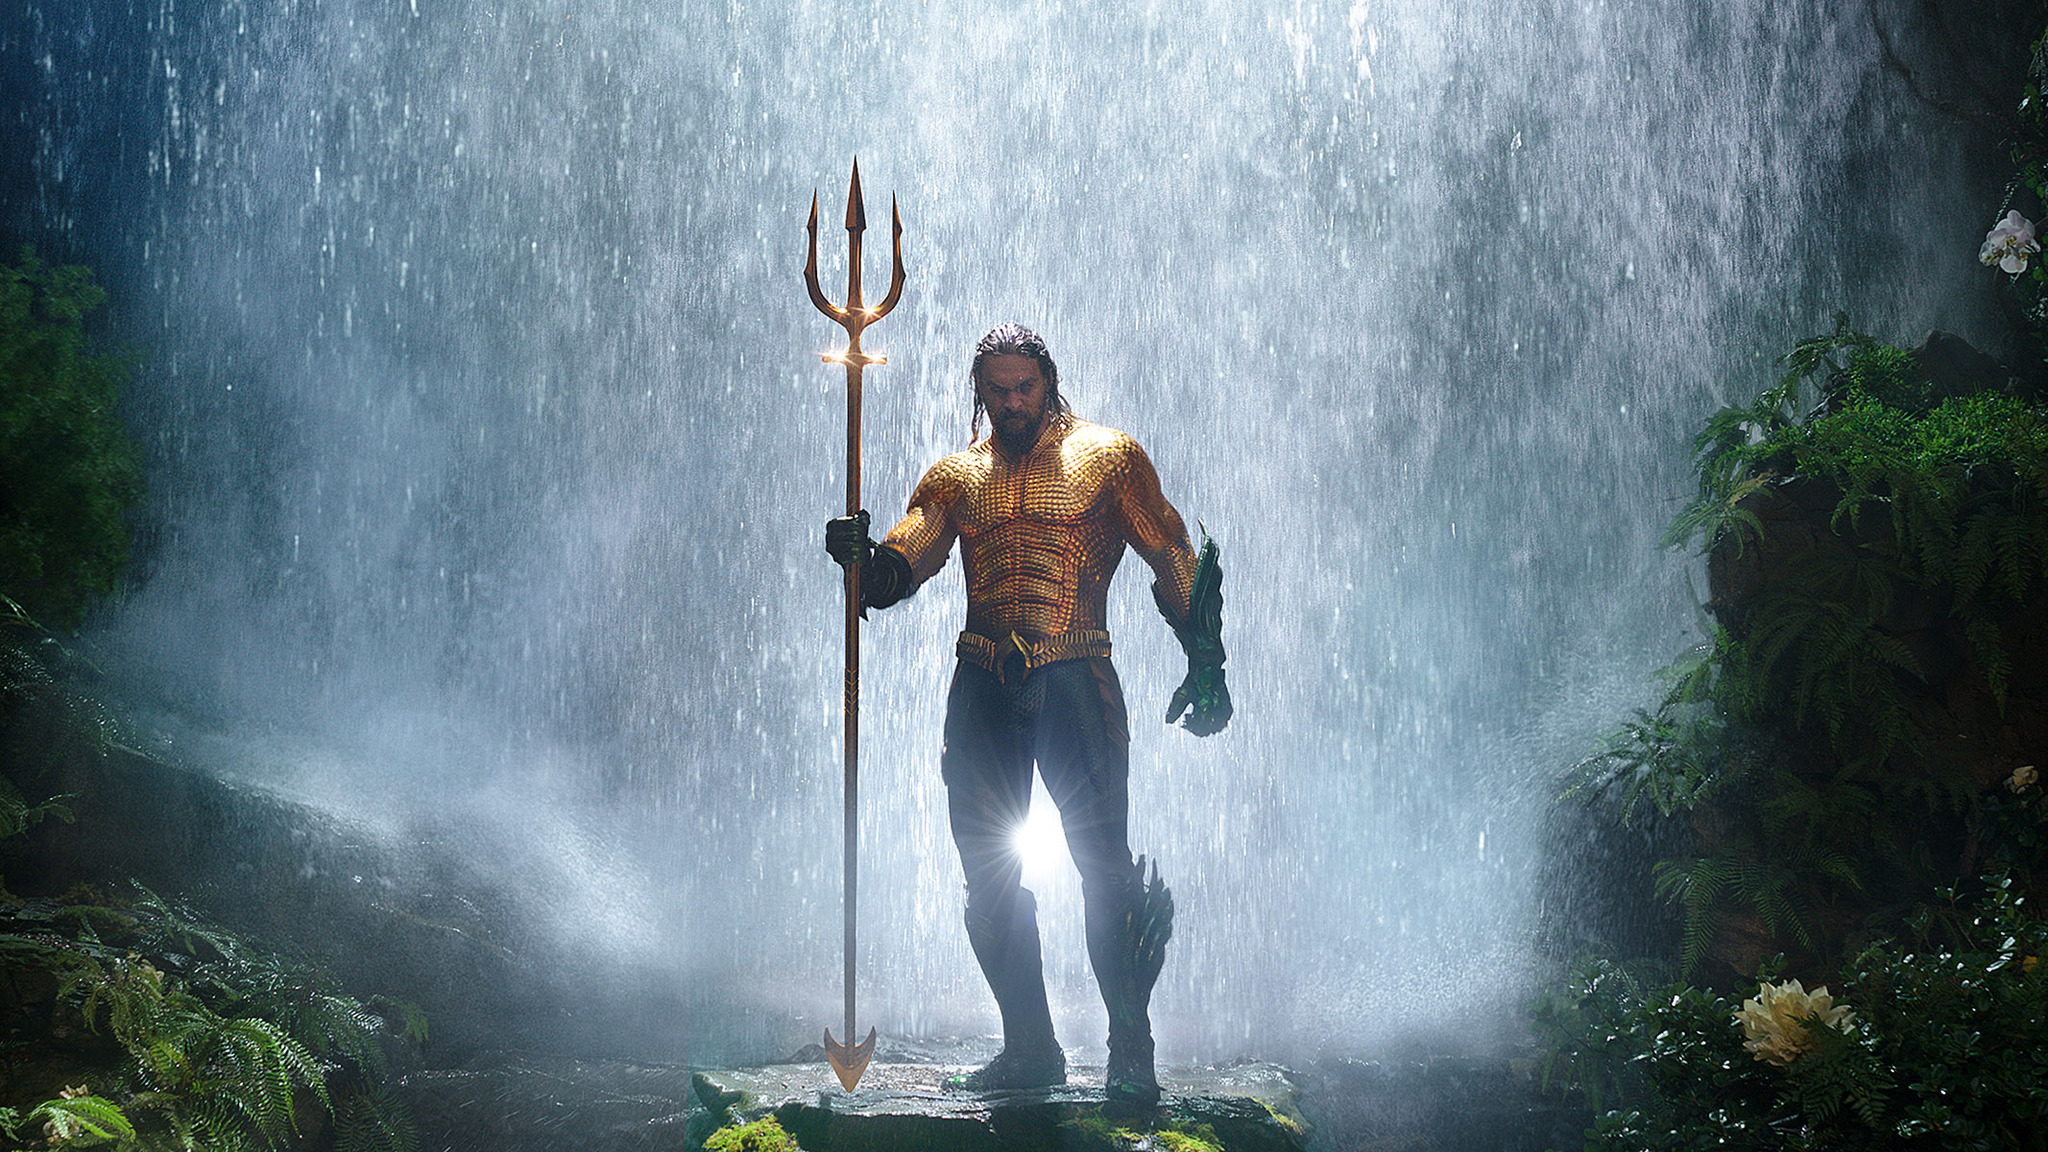 Aquaman Final Trailer Released: Footage Shows The New Atlantis In All It's Glory